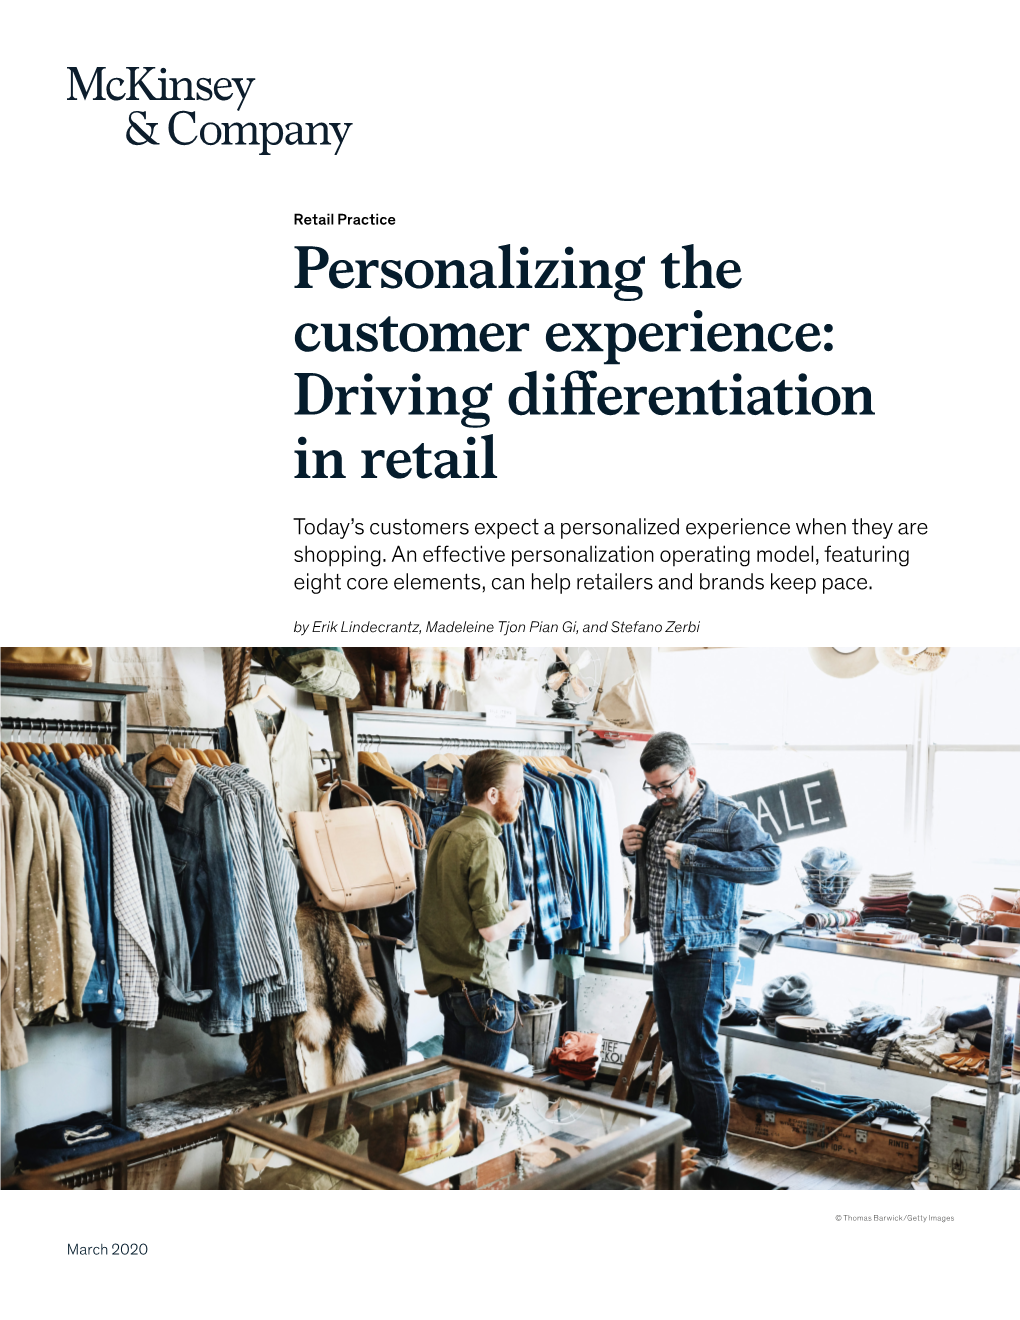 Personalizing the Customer Experience: Driving Differentiation in Retail